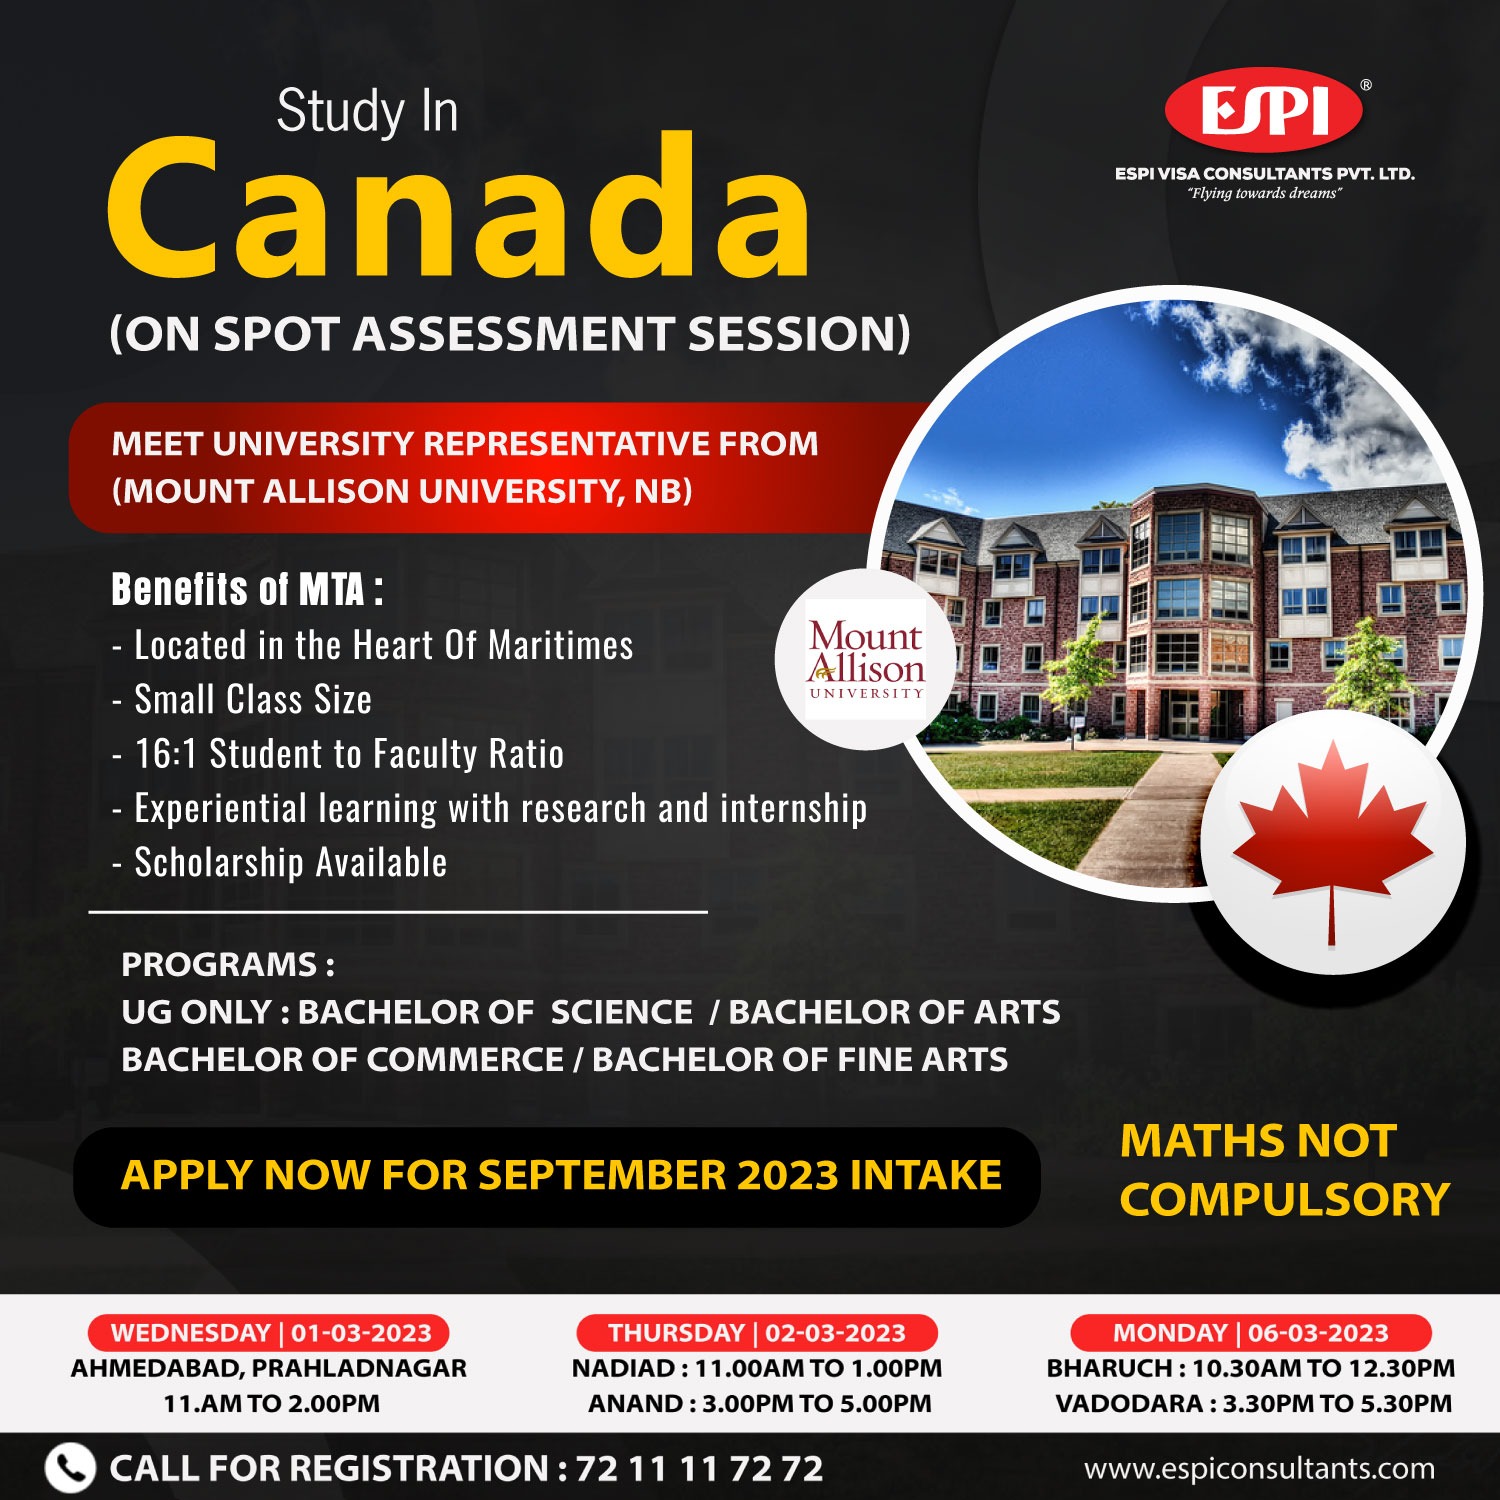  Study in Canada | Apply Now for September 2023 Intake